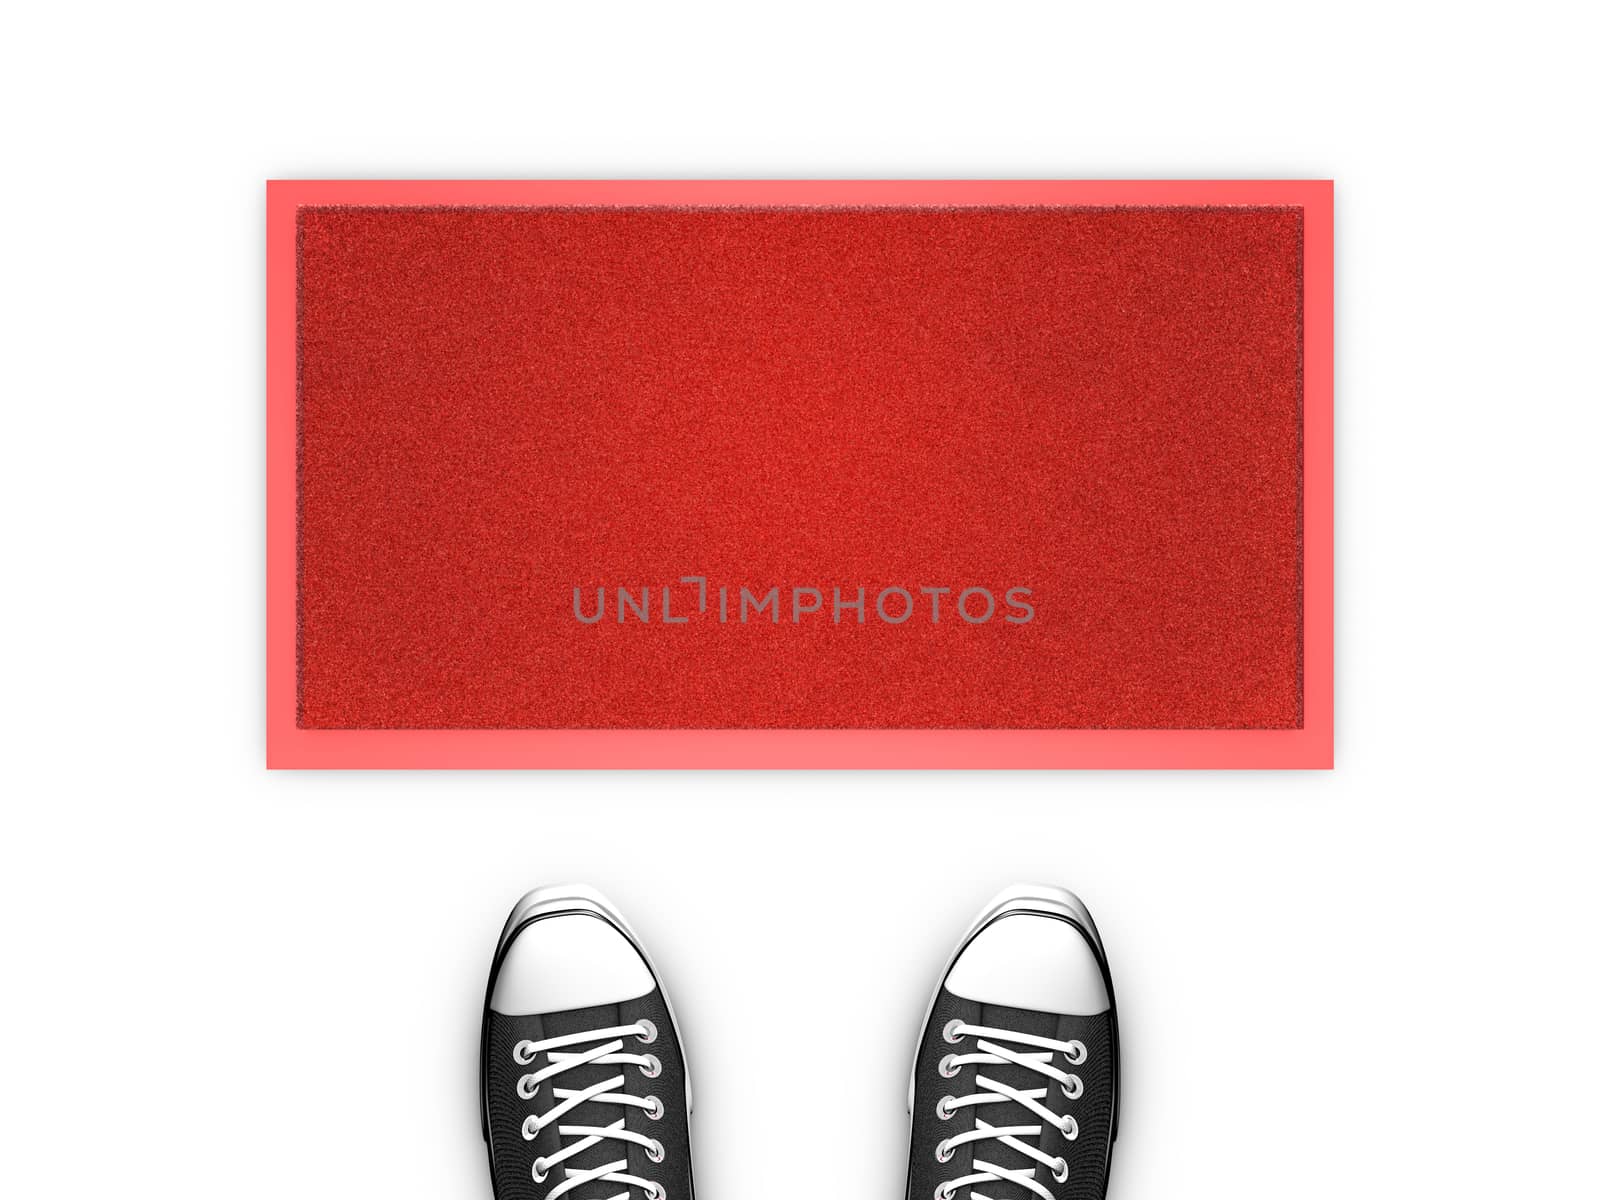 Concept illustration showing shoes in front of a red door map. Copy space available.